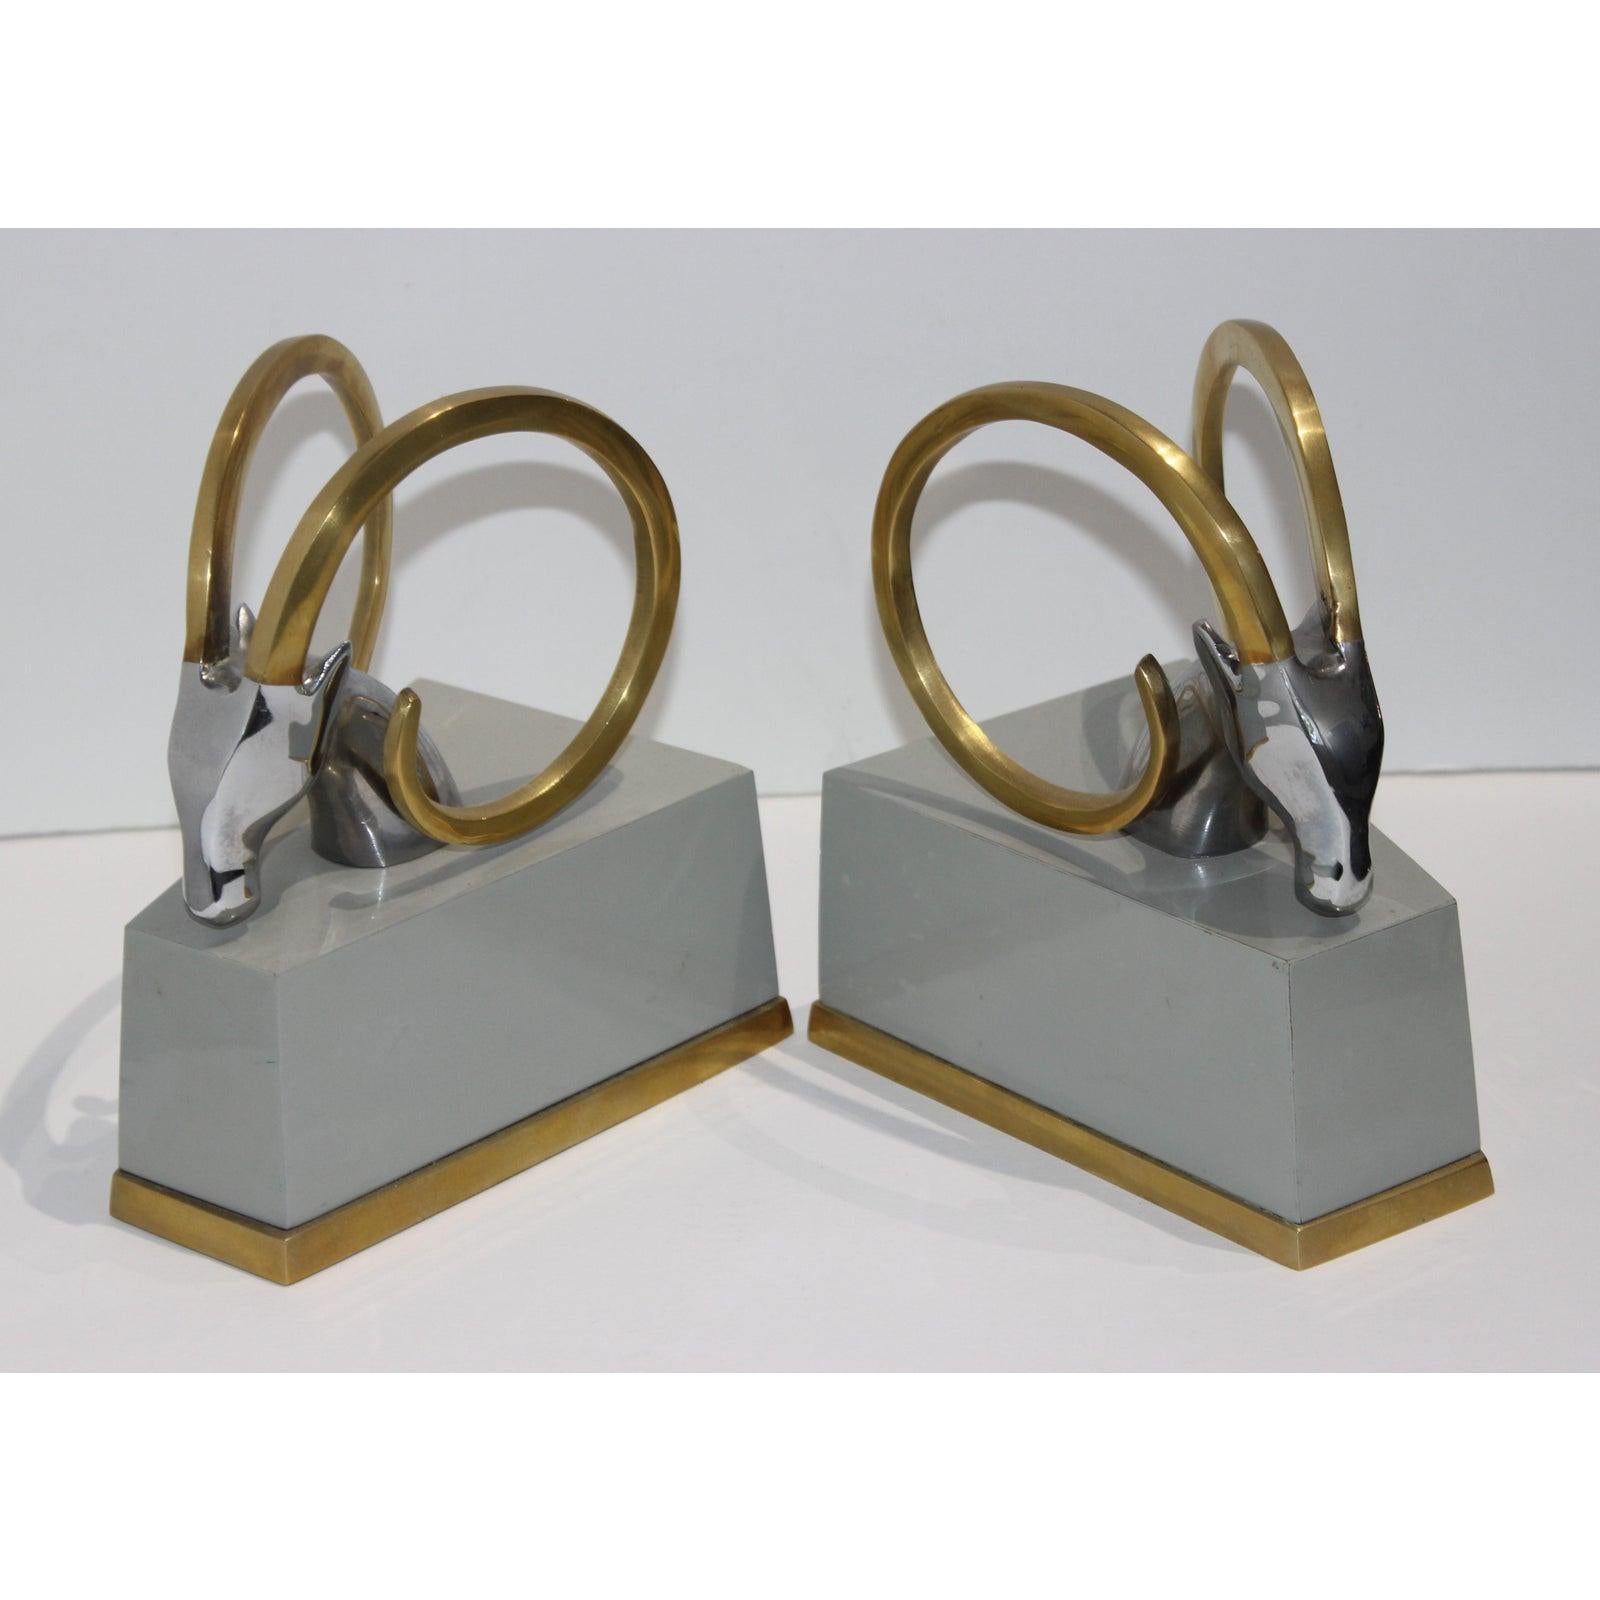 20th Century Art Deco Bookends with Brass Ibex Heads